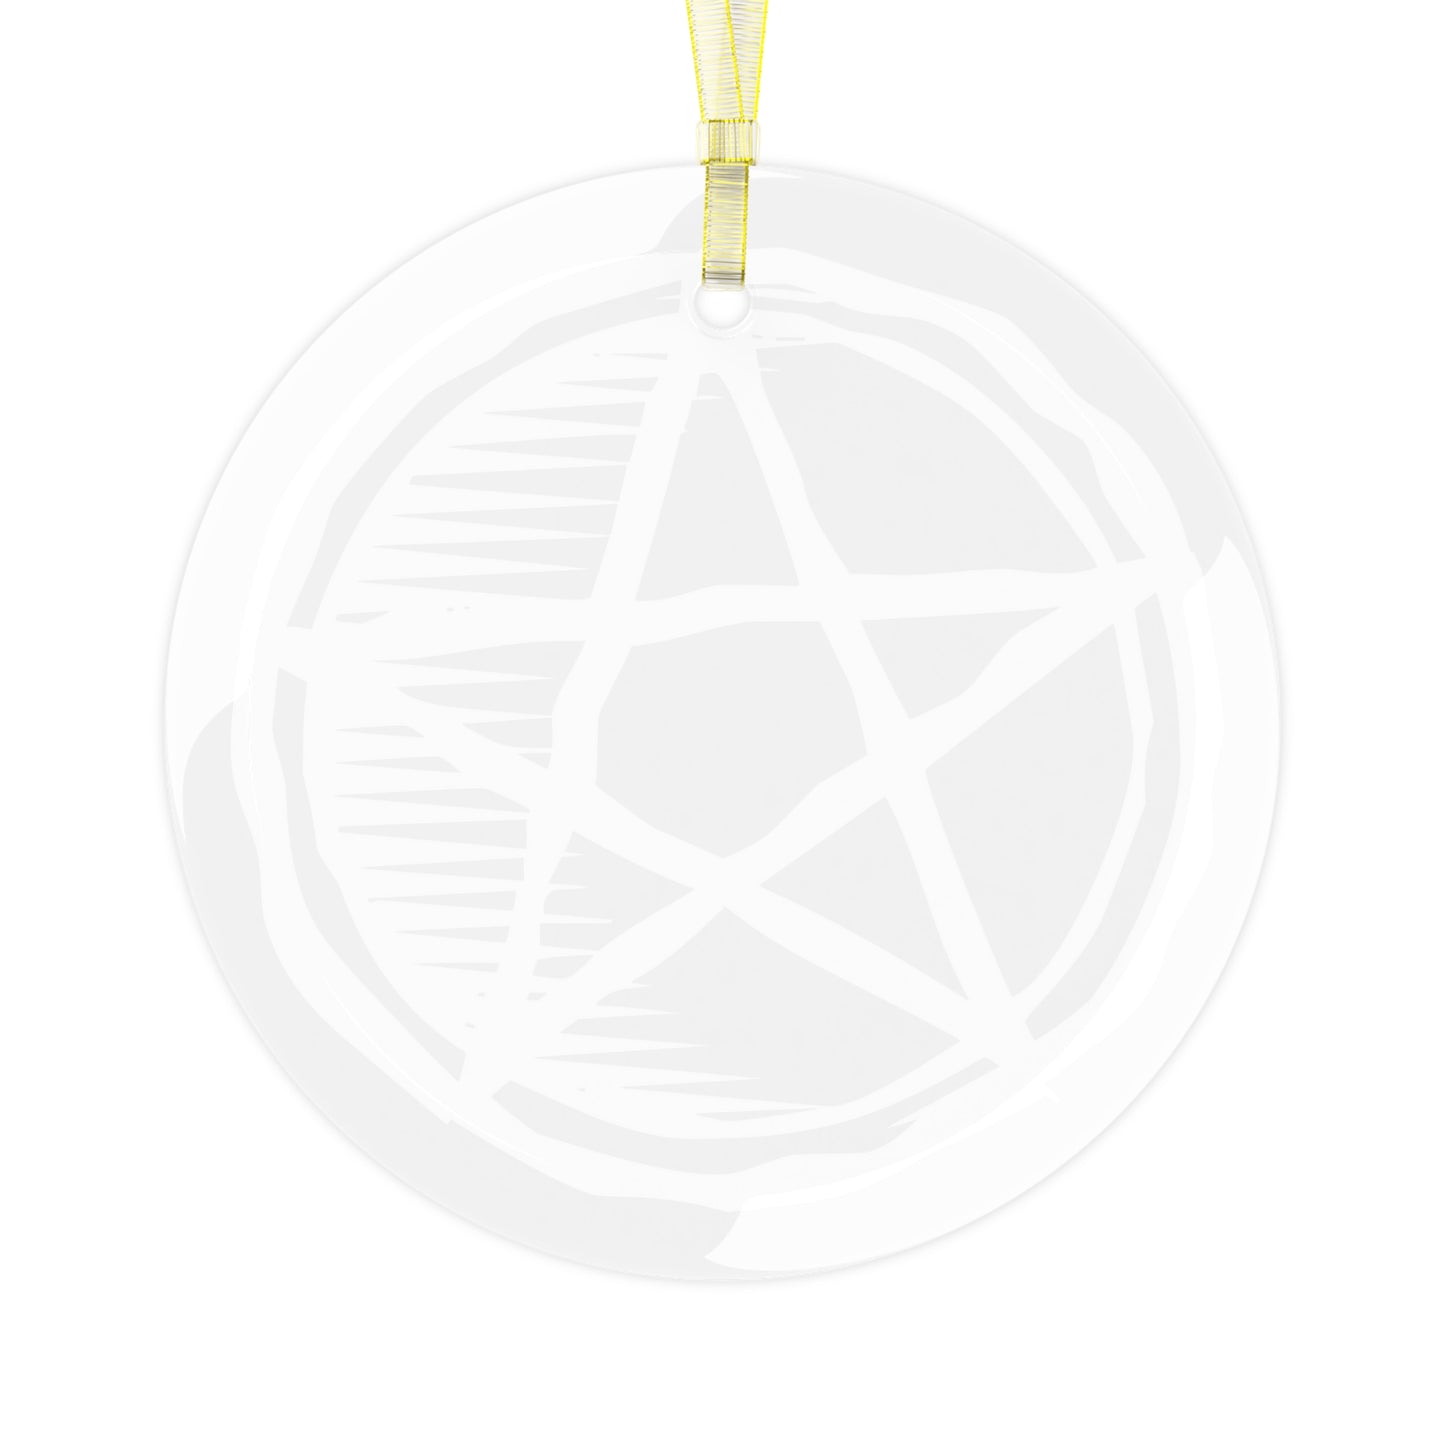 Glass Pentagram Ornament - Yule Ornament - Christmas Ornament - Ornament for Tree Winter Solstice - Pagan, Witch, Witchcraft